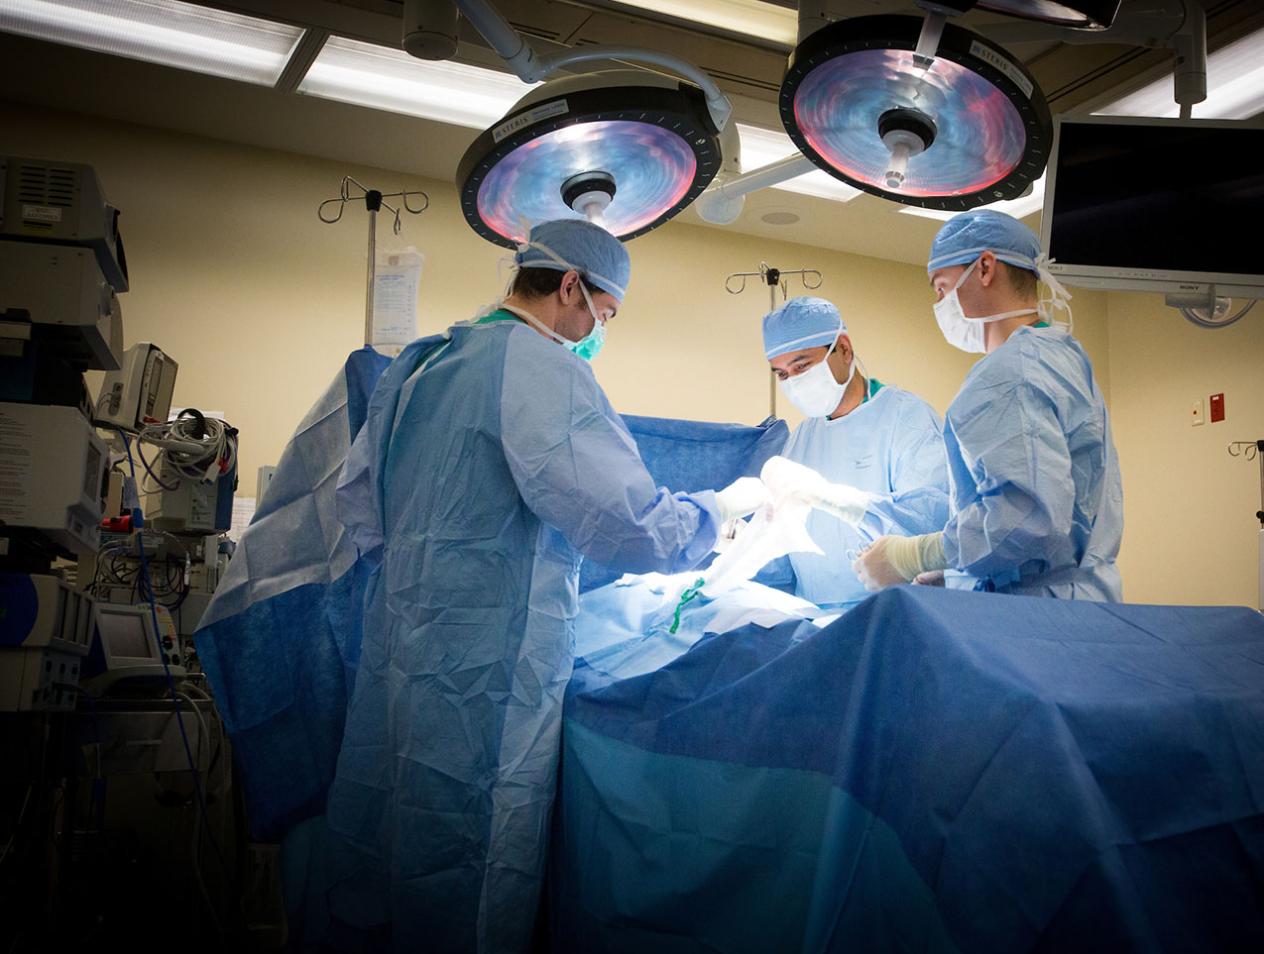 surgery residents operating